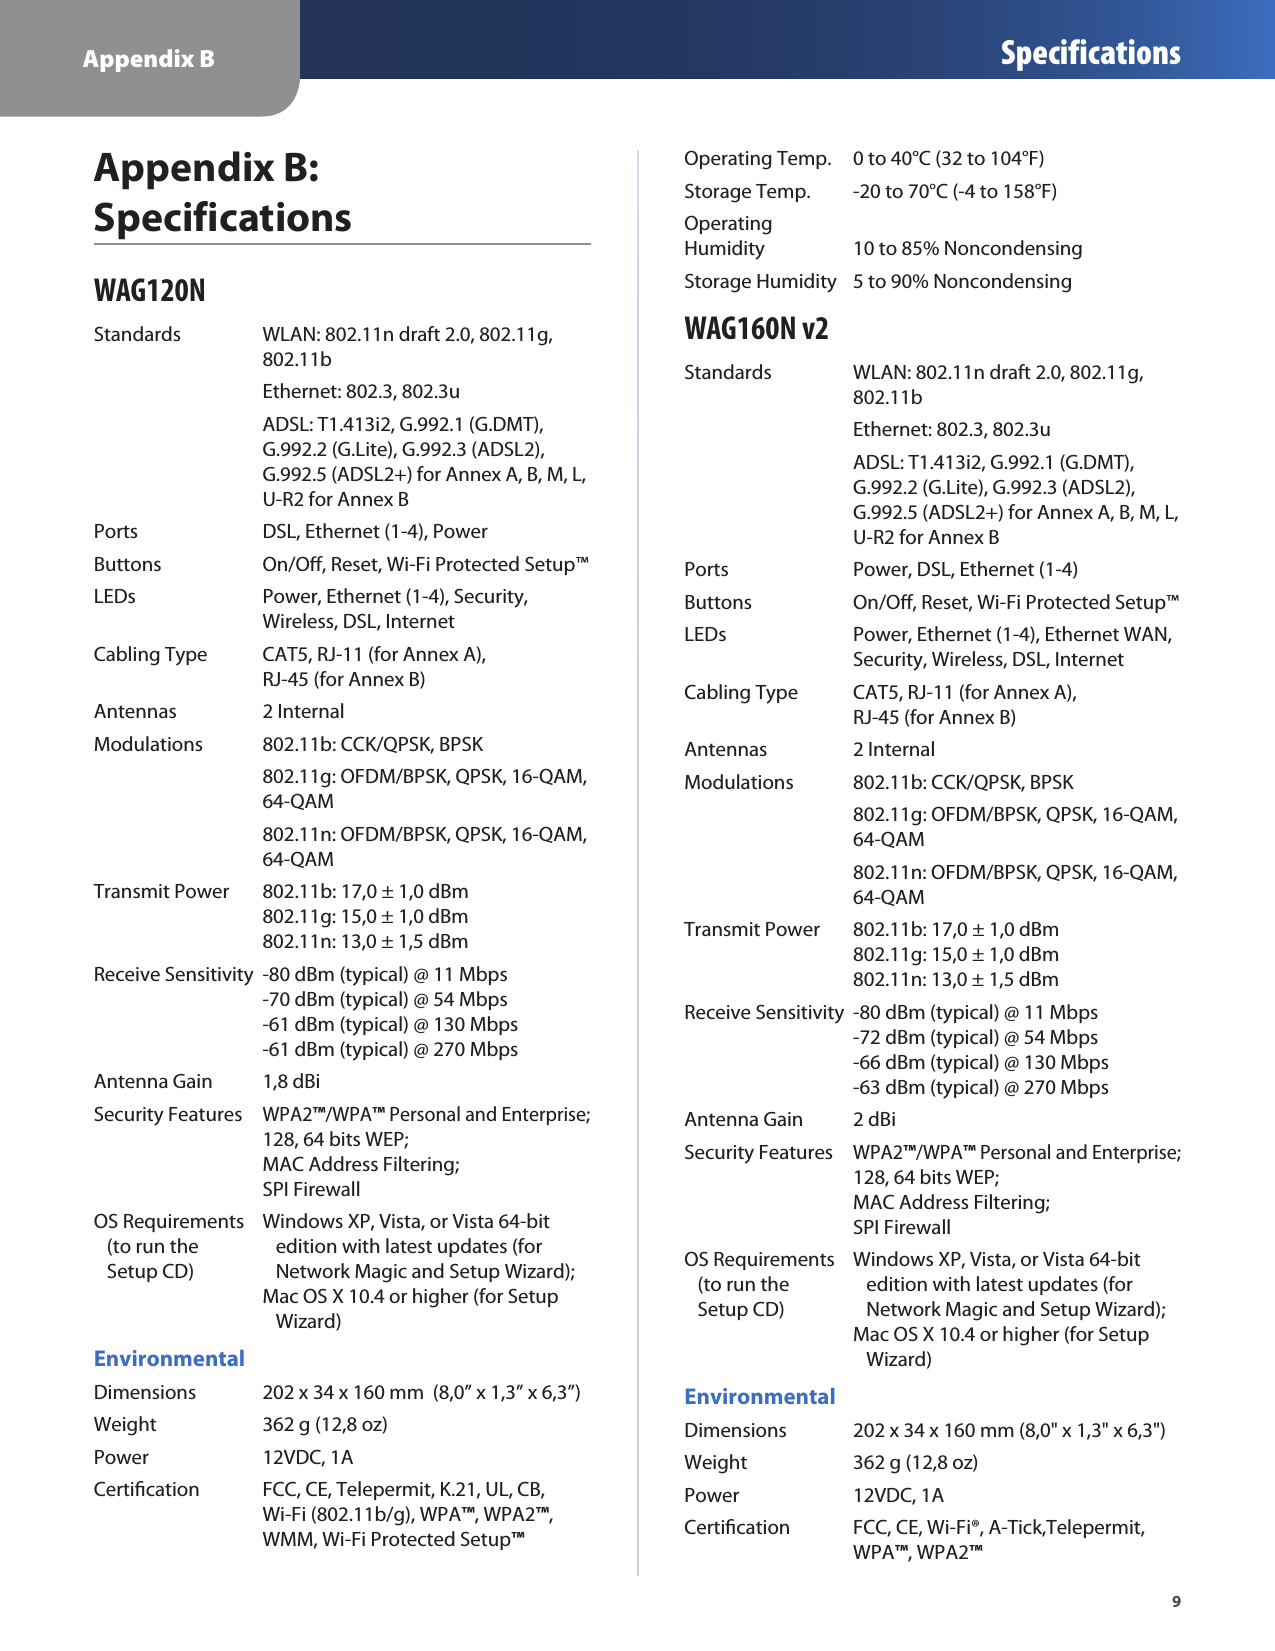 Appendix B Specifications9Appendix B:  SpecificationsWAG120NStandards  WLAN: 802.11n draft 2.0, 802.11g,    802.11b  Ethernet: 802.3, 802.3u  ADSL: T1.413i2, G.992.1 (G.DMT),    G.992.2 (G.Lite), G.992.3 (ADSL2),    G.992.5 (ADSL2+) for Annex A, B, M, L,    U-R2 for Annex BPorts  DSL, Ethernet (1-4), PowerButtons  On/O, Reset, Wi-Fi Protected Setup™LEDs  Power, Ethernet (1-4), Security,    Wireless, DSL, InternetCabling Type  CAT5, RJ-11 (for Annex A),    RJ-45 (for Annex B)Antennas  2 InternalModulations  802.11b: CCK/QPSK, BPSK  802.11g: OFDM/BPSK, QPSK, 16-QAM,    64-QAM  802.11n: OFDM/BPSK, QPSK, 16-QAM,    64-QAMTransmit Power  802.11b: 17,0 ± 1,0 dBm   802.11g: 15,0 ± 1,0 dBm   802.11n: 13,0 ± 1,5 dBmReceive Sensitivity  -80 dBm (typical) @ 11 Mbps   -70 dBm (typical) @ 54 Mbps   -61 dBm (typical) @ 130 Mbps   -61 dBm (typical) @ 270 MbpsAntenna Gain  1,8 dBiSecurity Features WPA2™/WPA™ Personal and Enterprise;  128, 64 bits WEP;   MAC Address Filtering;   SPI FirewallOS Requirements  Windows XP, Vista, or Vista 64-bit     (to run the     edition with latest updates (for     Setup CD)     Network Magic and Setup Wizard);   Mac OS X 10.4 or higher (for Setup       Wizard)EnvironmentalDimensions  202 x 34 x 160 mm  (8,0” x 1,3” x 6,3”)Weight  362 g (12,8 oz)Power  12VDC, 1ACertication  FCC, CE, Telepermit, K.21, UL, CB,    Wi-Fi (802.11b/g), WPA™, WPA2™,   WMM, Wi-Fi Protected Setup™Operating Temp.  0 to 40°C (32 to 104°F)Storage Temp.  -20 to 70°C (-4 to 158°F)Operating Humidity  10 to 85% NoncondensingStorage Humidity  5 to 90% NoncondensingWAG160N v2Standards  WLAN: 802.11n draft 2.0, 802.11g,    802.11b  Ethernet: 802.3, 802.3u  ADSL: T1.413i2, G.992.1 (G.DMT),    G.992.2 (G.Lite), G.992.3 (ADSL2),    G.992.5 (ADSL2+) for Annex A, B, M, L,    U-R2 for Annex BPorts  Power, DSL, Ethernet (1-4)Buttons  On/O, Reset, Wi-Fi Protected Setup™LEDs  Power, Ethernet (1-4), Ethernet WAN,   Security, Wireless, DSL, InternetCabling Type  CAT5, RJ-11 (for Annex A),    RJ-45 (for Annex B)Antennas  2 InternalModulations  802.11b: CCK/QPSK, BPSK  802.11g: OFDM/BPSK, QPSK, 16-QAM,    64-QAM  802.11n: OFDM/BPSK, QPSK, 16-QAM,    64-QAMTransmit Power  802.11b: 17,0 ± 1,0 dBm   802.11g: 15,0 ± 1,0 dBm   802.11n: 13,0 ± 1,5 dBmReceive Sensitivity  -80 dBm (typical) @ 11 Mbps   -72 dBm (typical) @ 54 Mbps   -66 dBm (typical) @ 130 Mbps   -63 dBm (typical) @ 270 MbpsAntenna Gain  2 dBiSecurity Features WPA2™/WPA™ Personal and Enterprise;  128, 64 bits WEP;   MAC Address Filtering;   SPI FirewallOS Requirements  Windows XP, Vista, or Vista 64-bit     (to run the     edition with latest updates (for     Setup CD)     Network Magic and Setup Wizard);   Mac OS X 10.4 or higher (for Setup       Wizard)EnvironmentalDimensions  202 x 34 x 160 mm (8,0&quot; x 1,3&quot; x 6,3&quot;)Weight  362 g (12,8 oz)Power  12VDC, 1ACertication  FCC, CE, Wi-Fi®, A-Tick,Telepermit,    WPA™, WPA2™